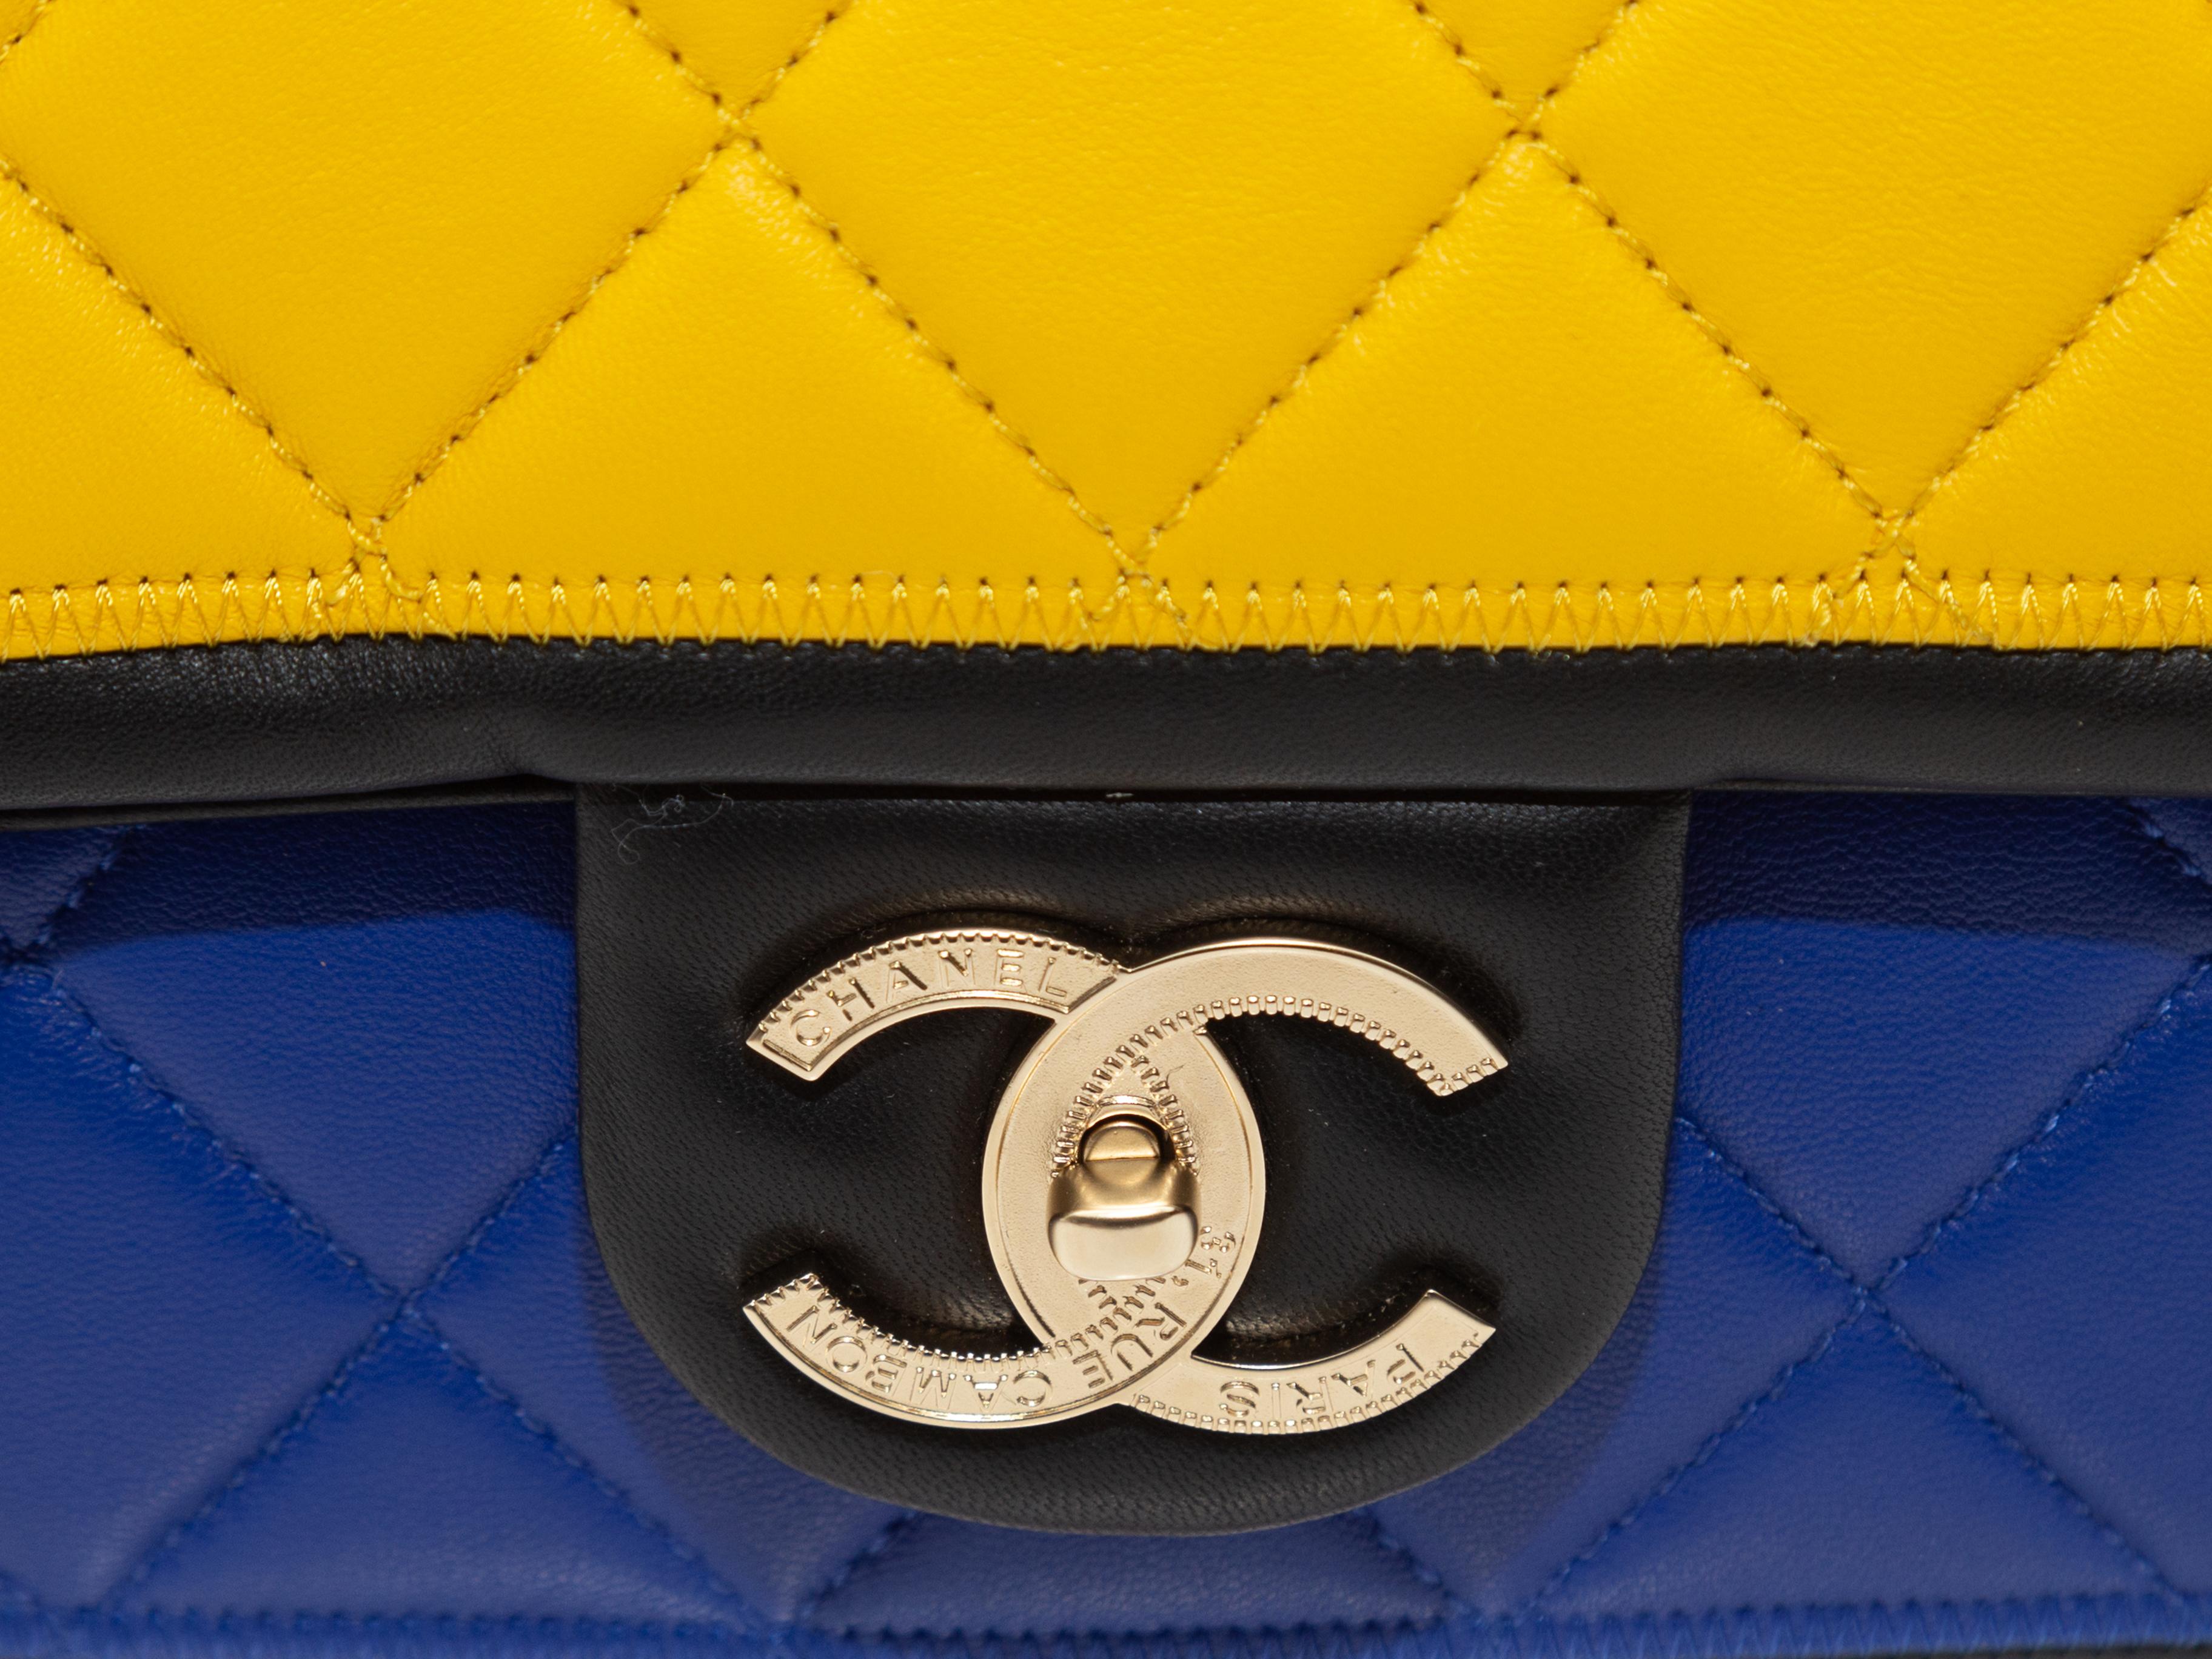 Product details: Multicolor quilted leather color block Medium Flap Bag by Chanel. Gold-tone hardware. Interior zip pocket. Chain-link and leather strap. CC push-lock closure at front flap. 10.5